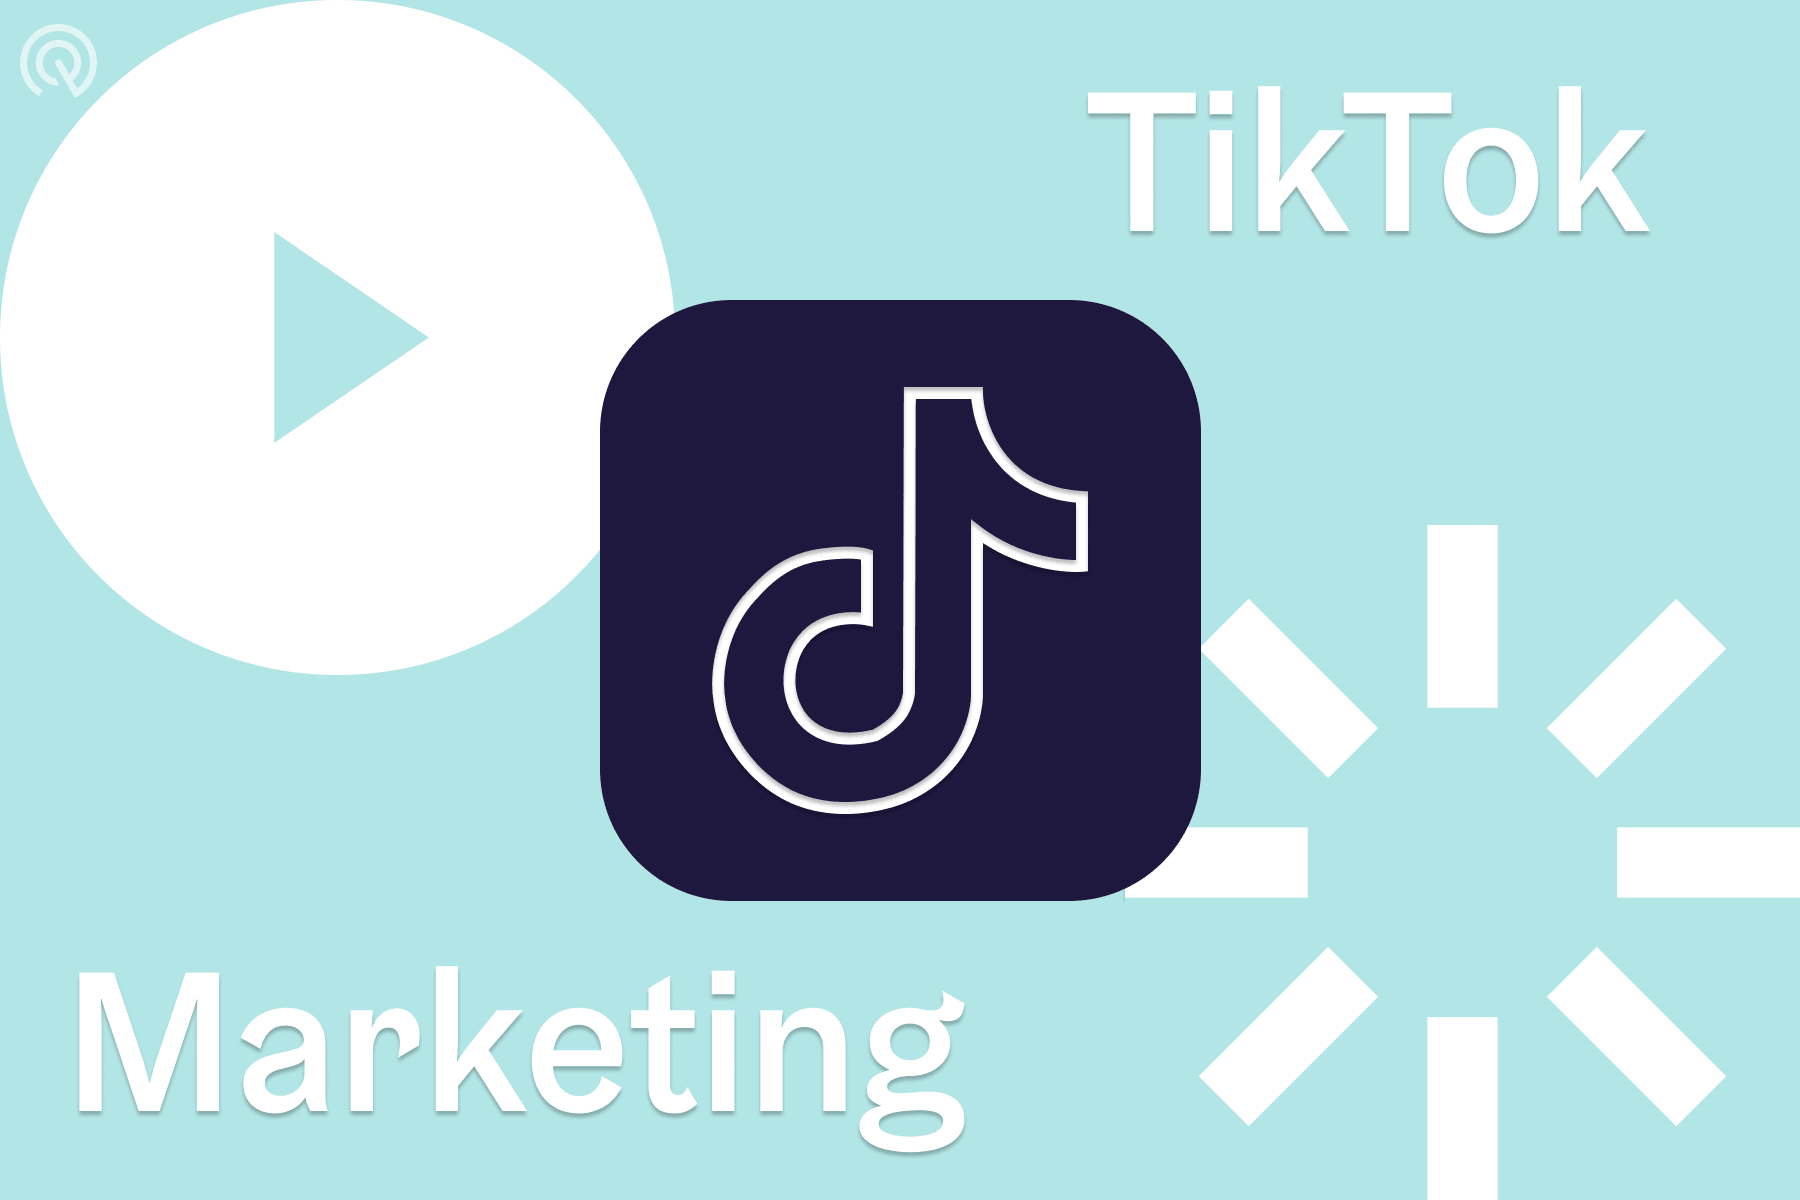 websites that have cookie clicker unblocked｜TikTok Search